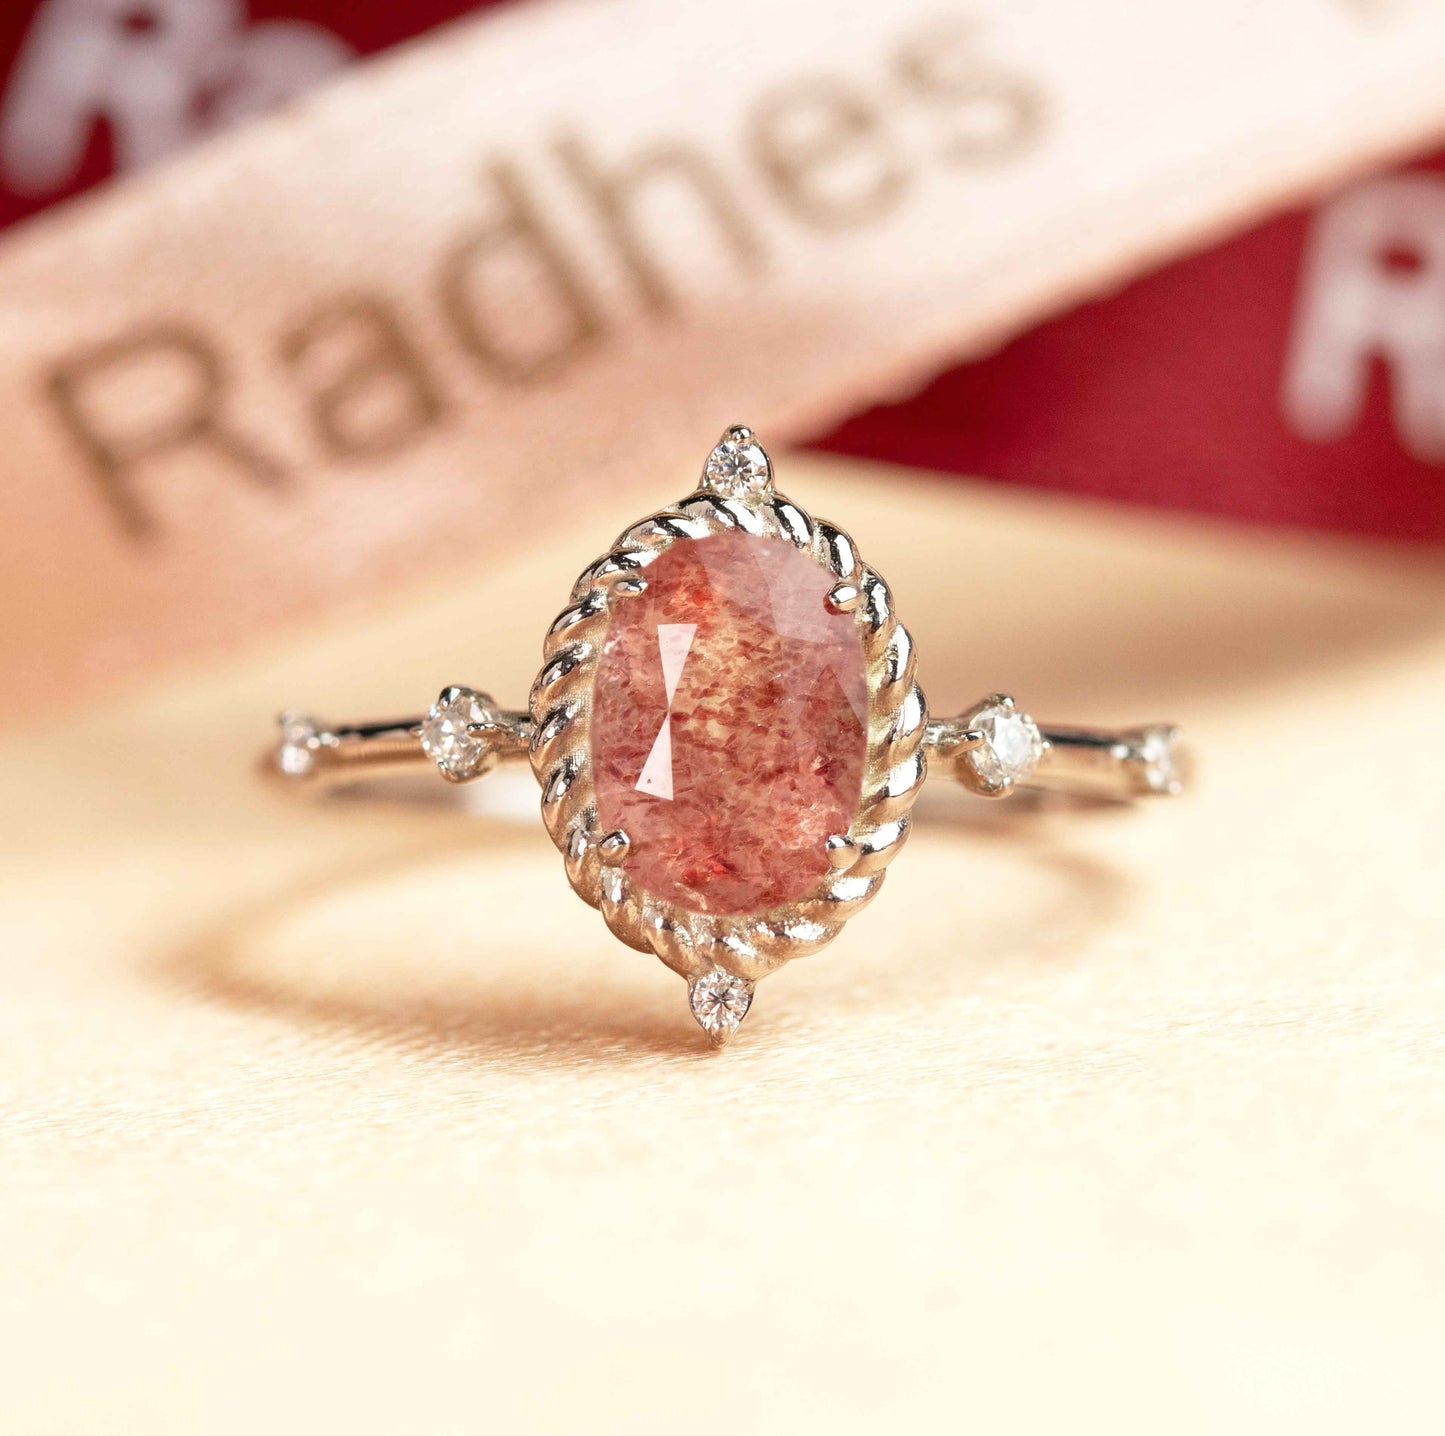 Swirl 1.05 carat Oval Cut Red Strawberry Quartz and Diamond Accent Vintage Ring in White Gold